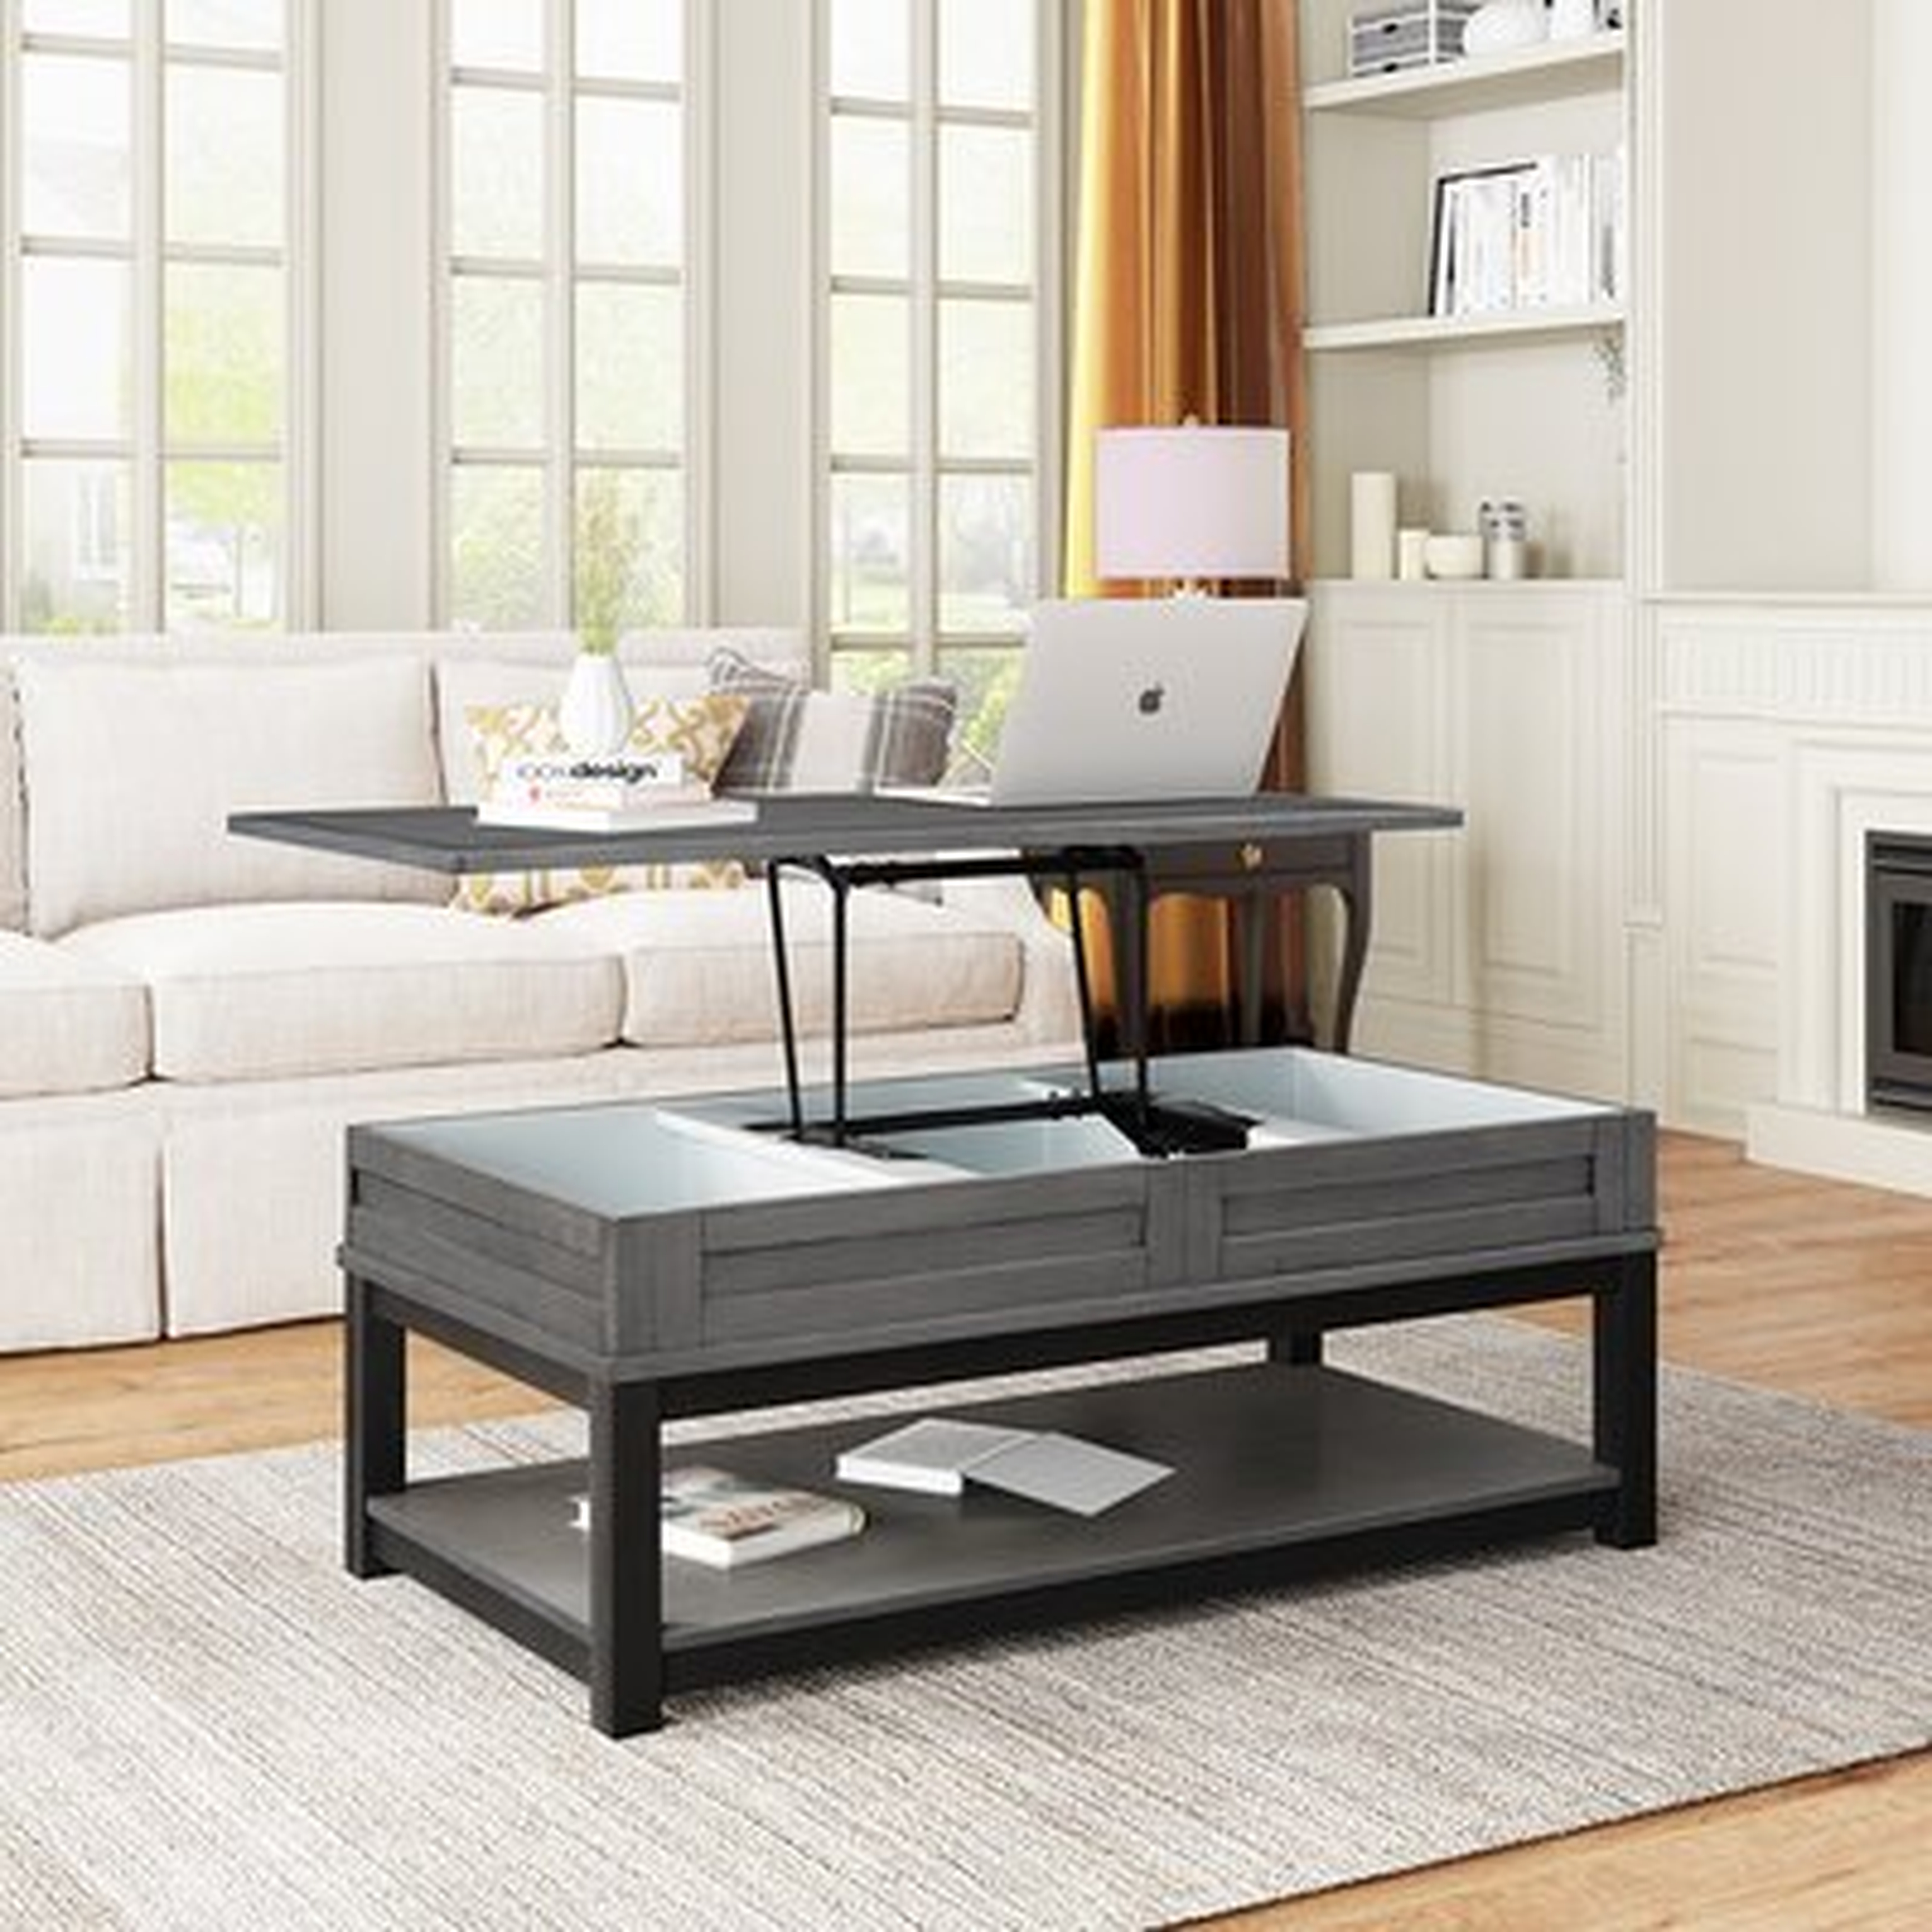 Dempster Lift Top Coffee Table with Storage - Wayfair